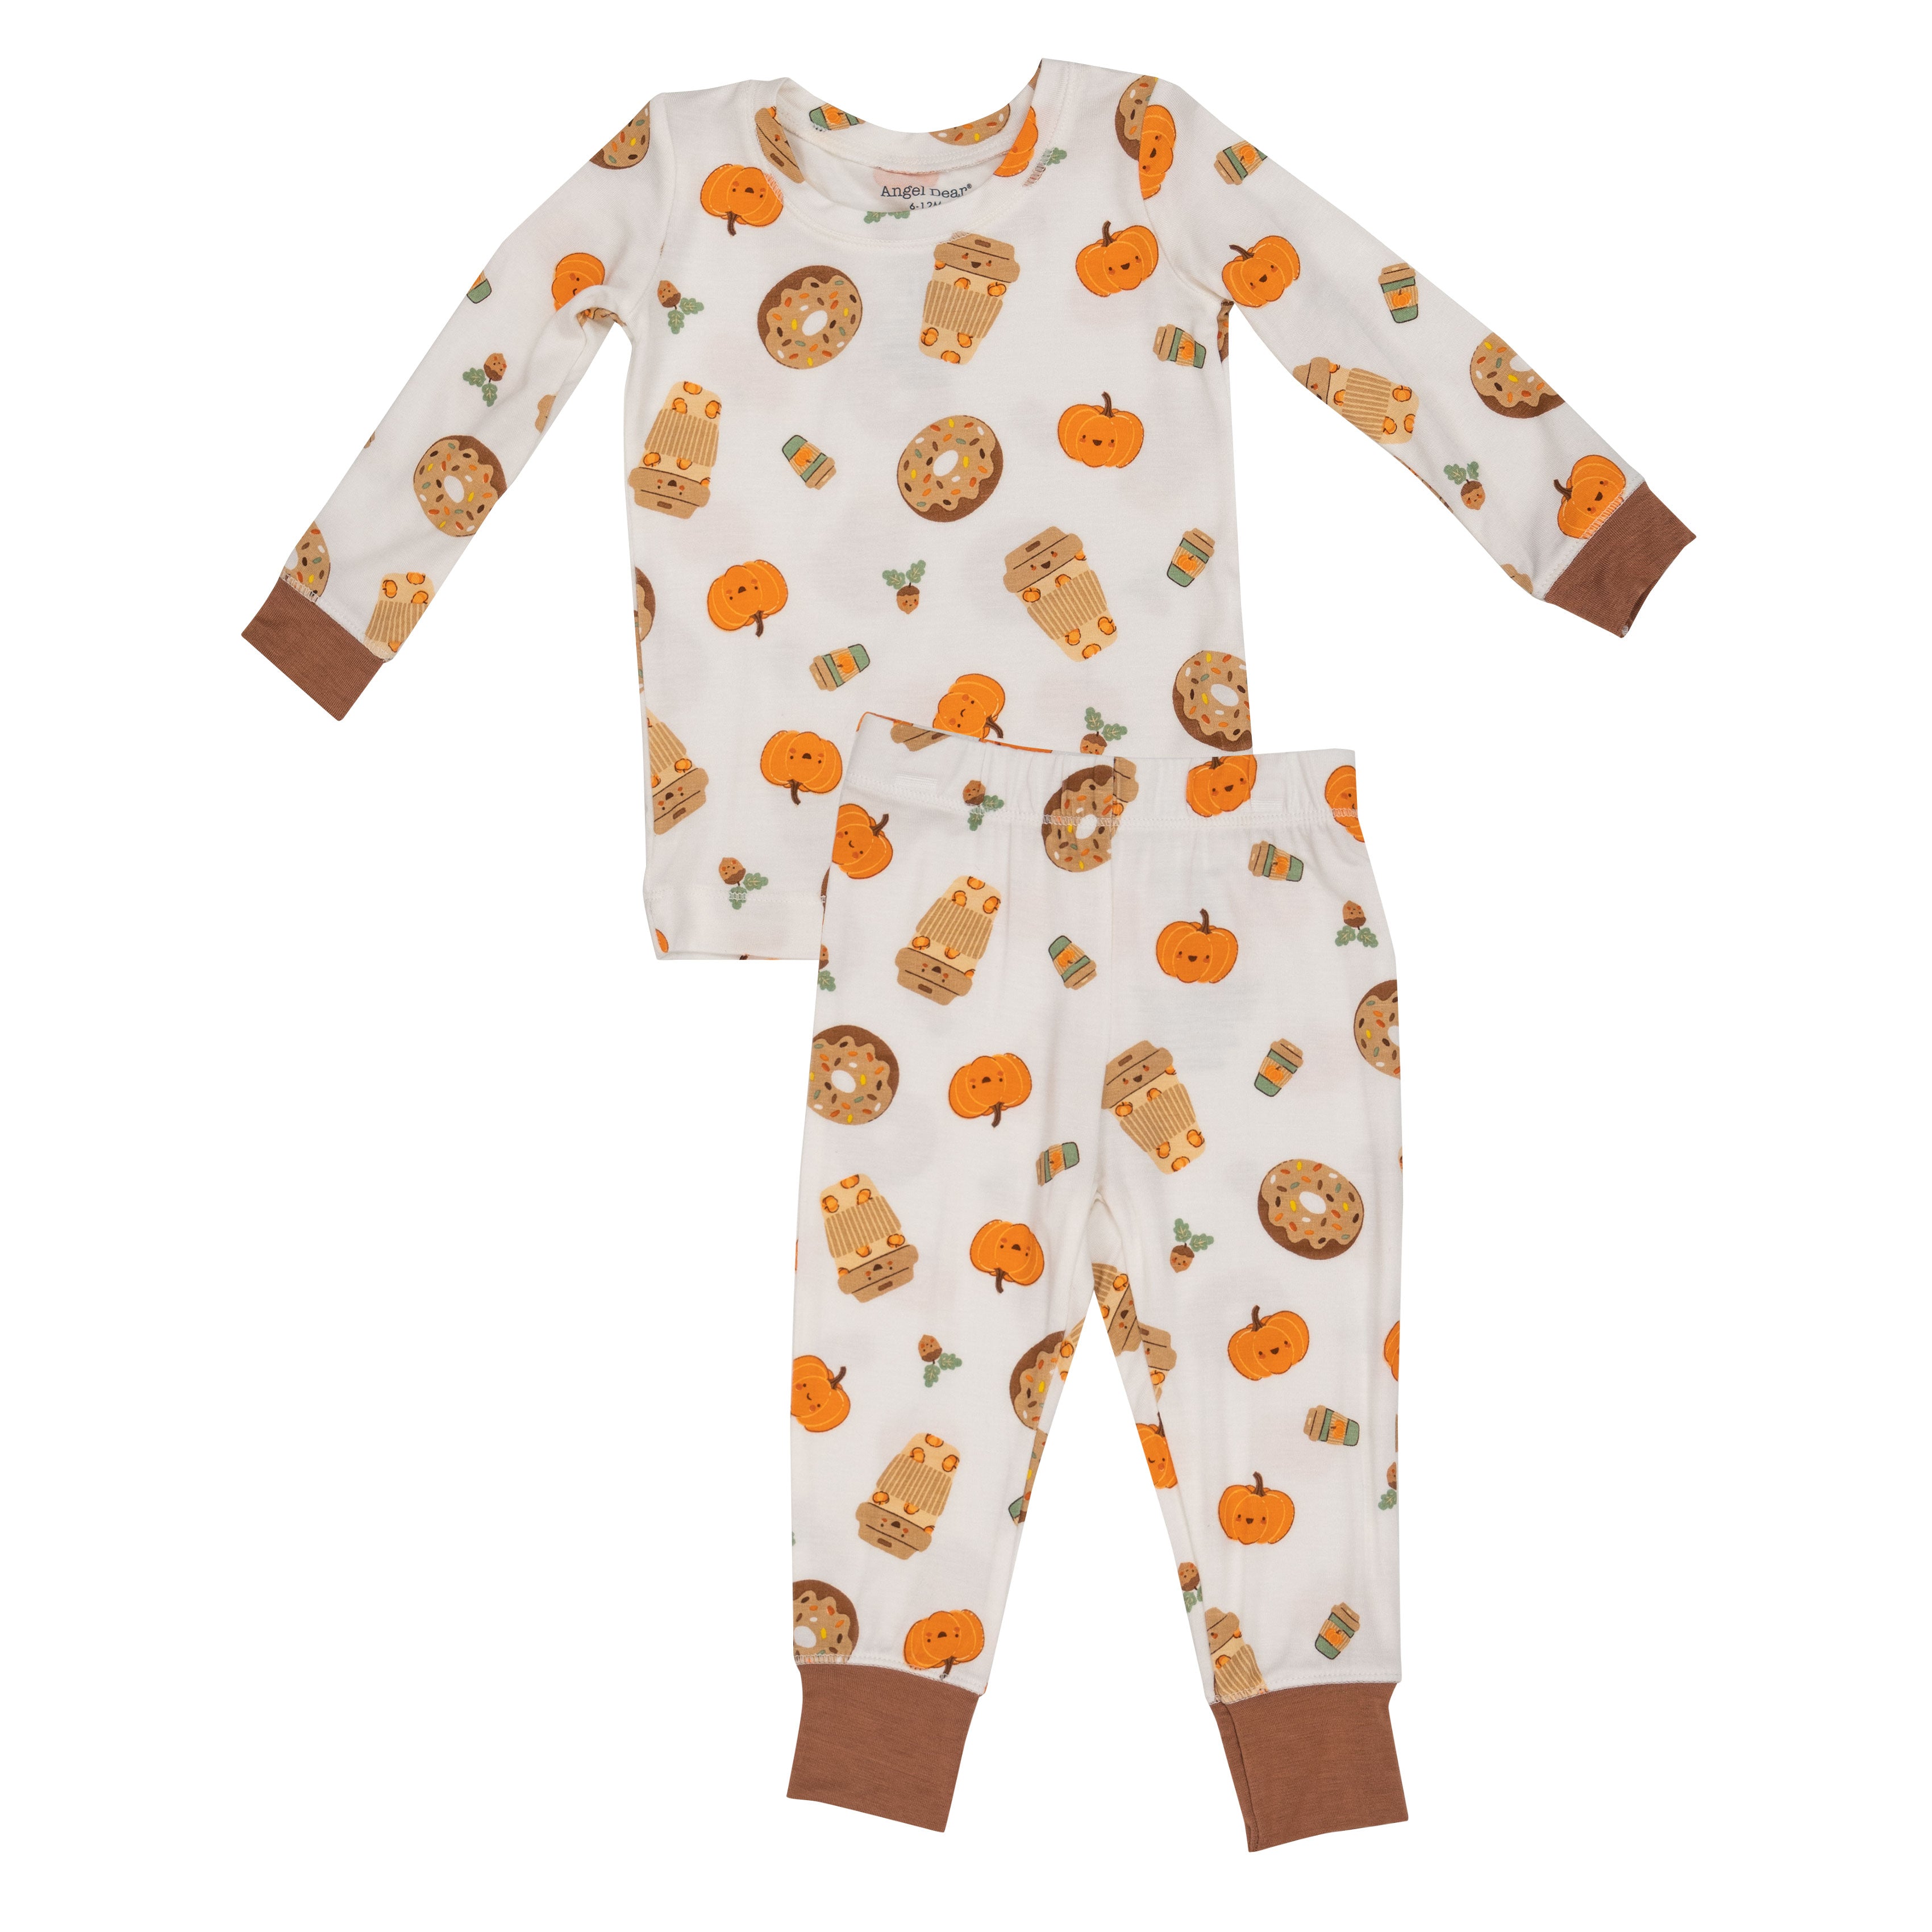 white loungewear set with pumpkin spice donuts, pumpkins and pumpkin spice coffee with brown on the wrist and ankles